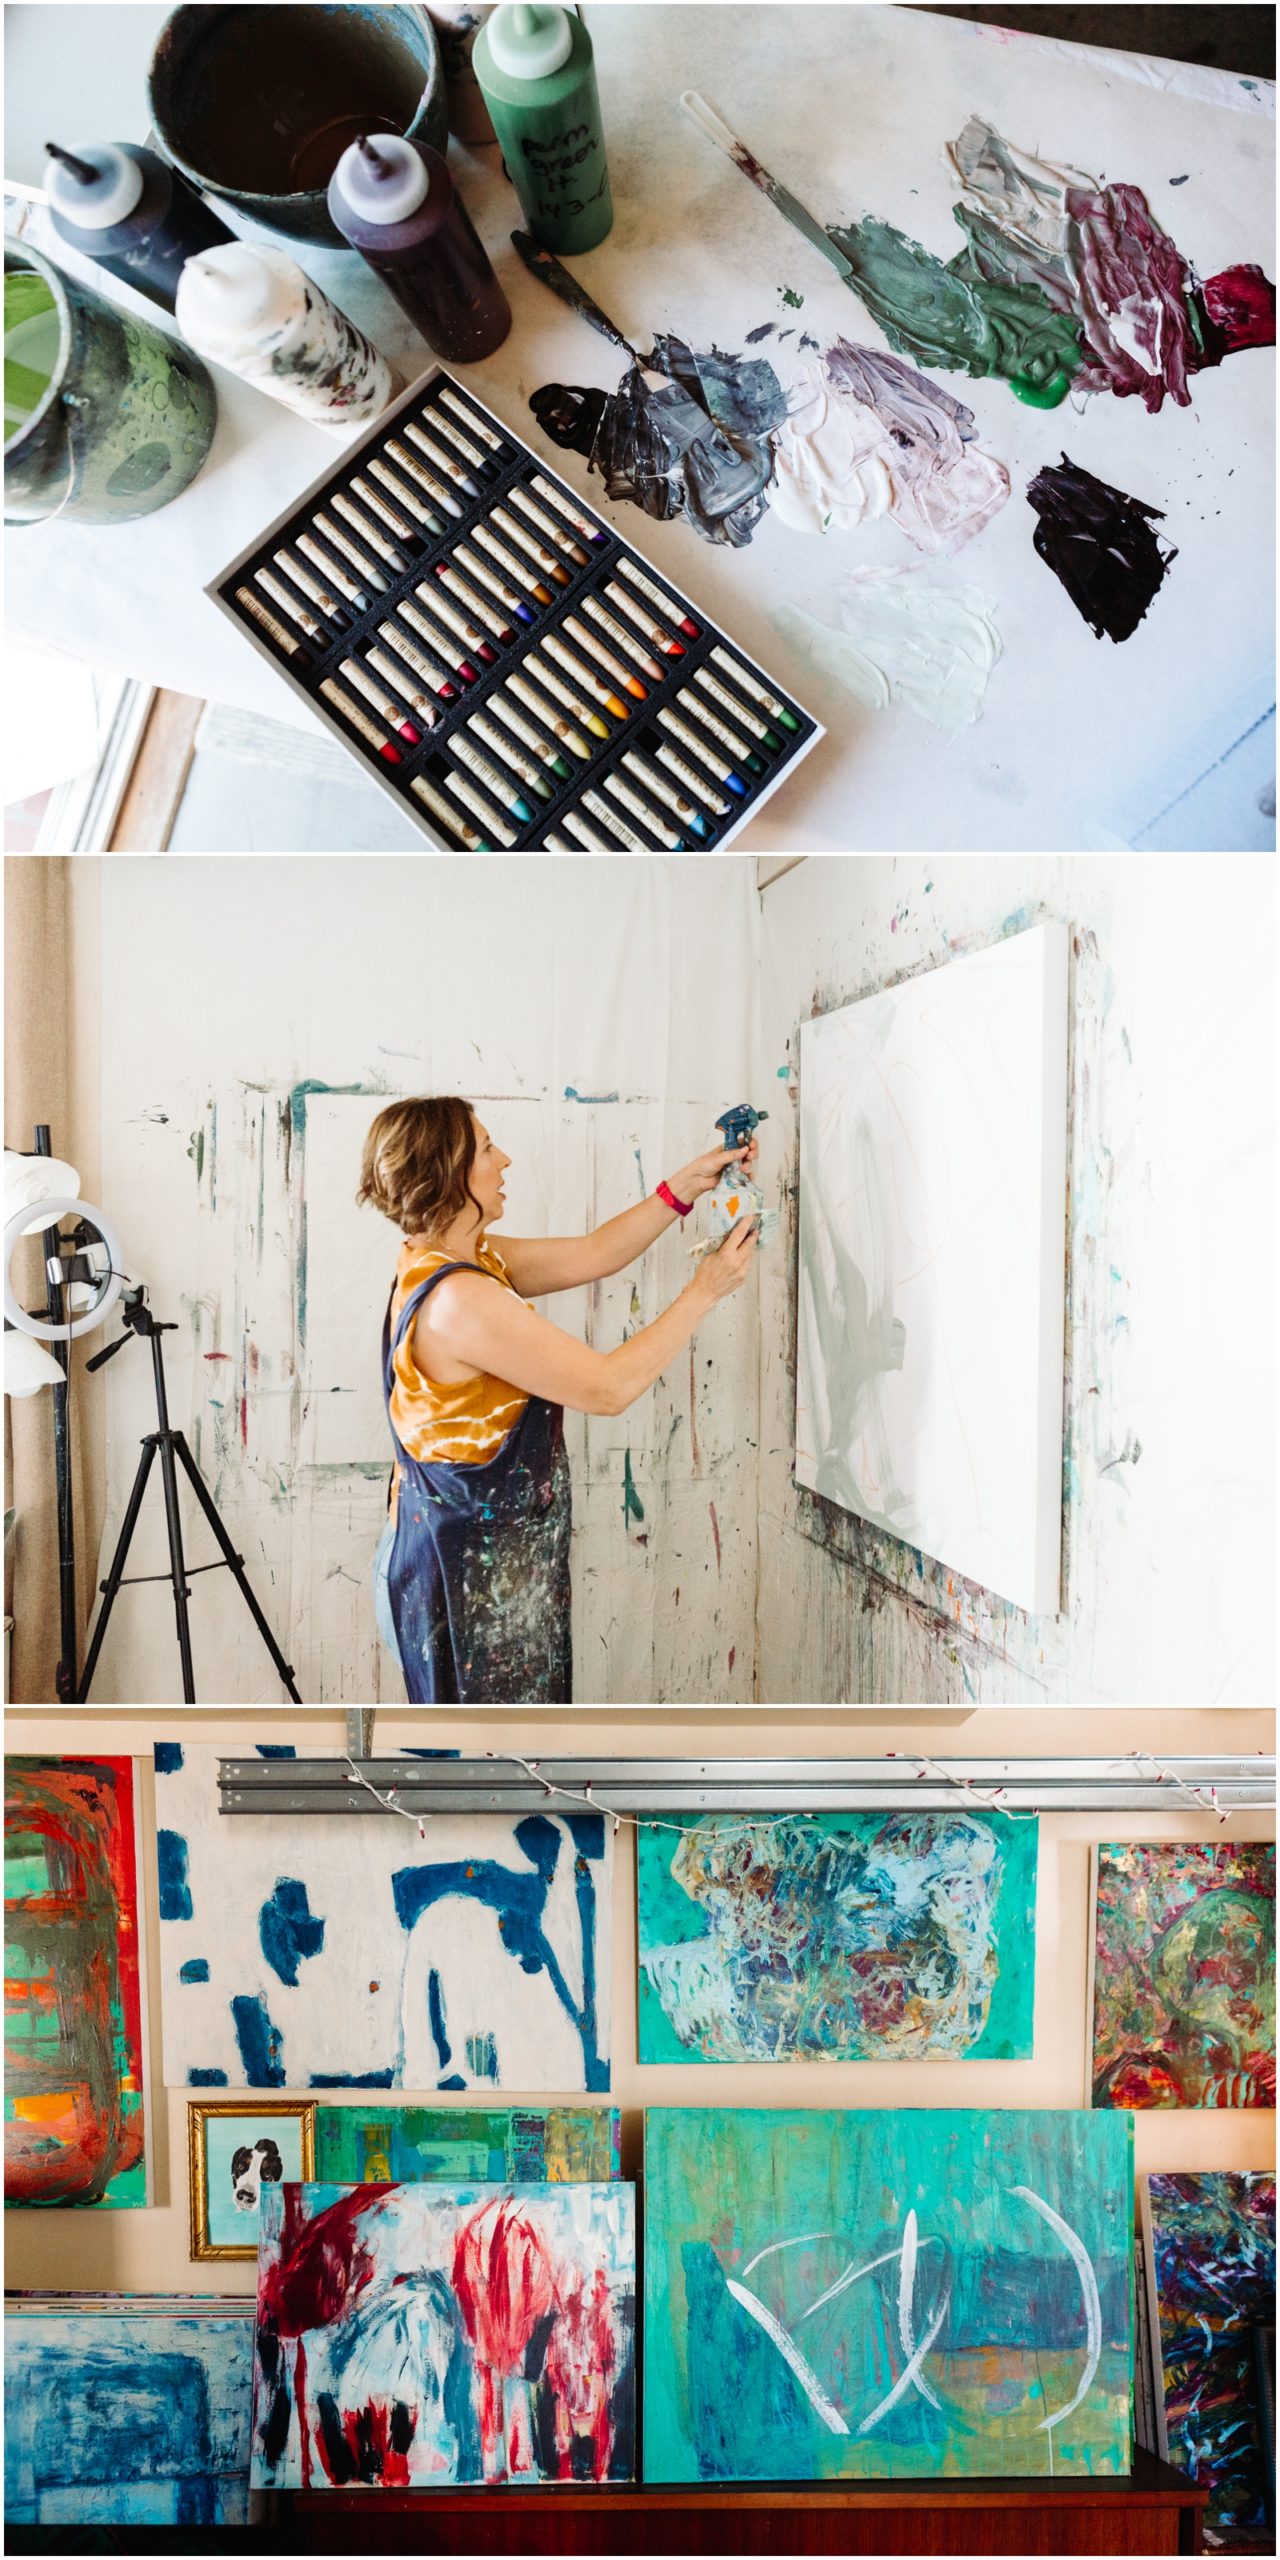 A lifestyle portrait photography session of a Santa Barbara artist Wendy Fisher in her creative studio. Images feature environmental portraiture and headshots focused on her paintings and creative work in progress.